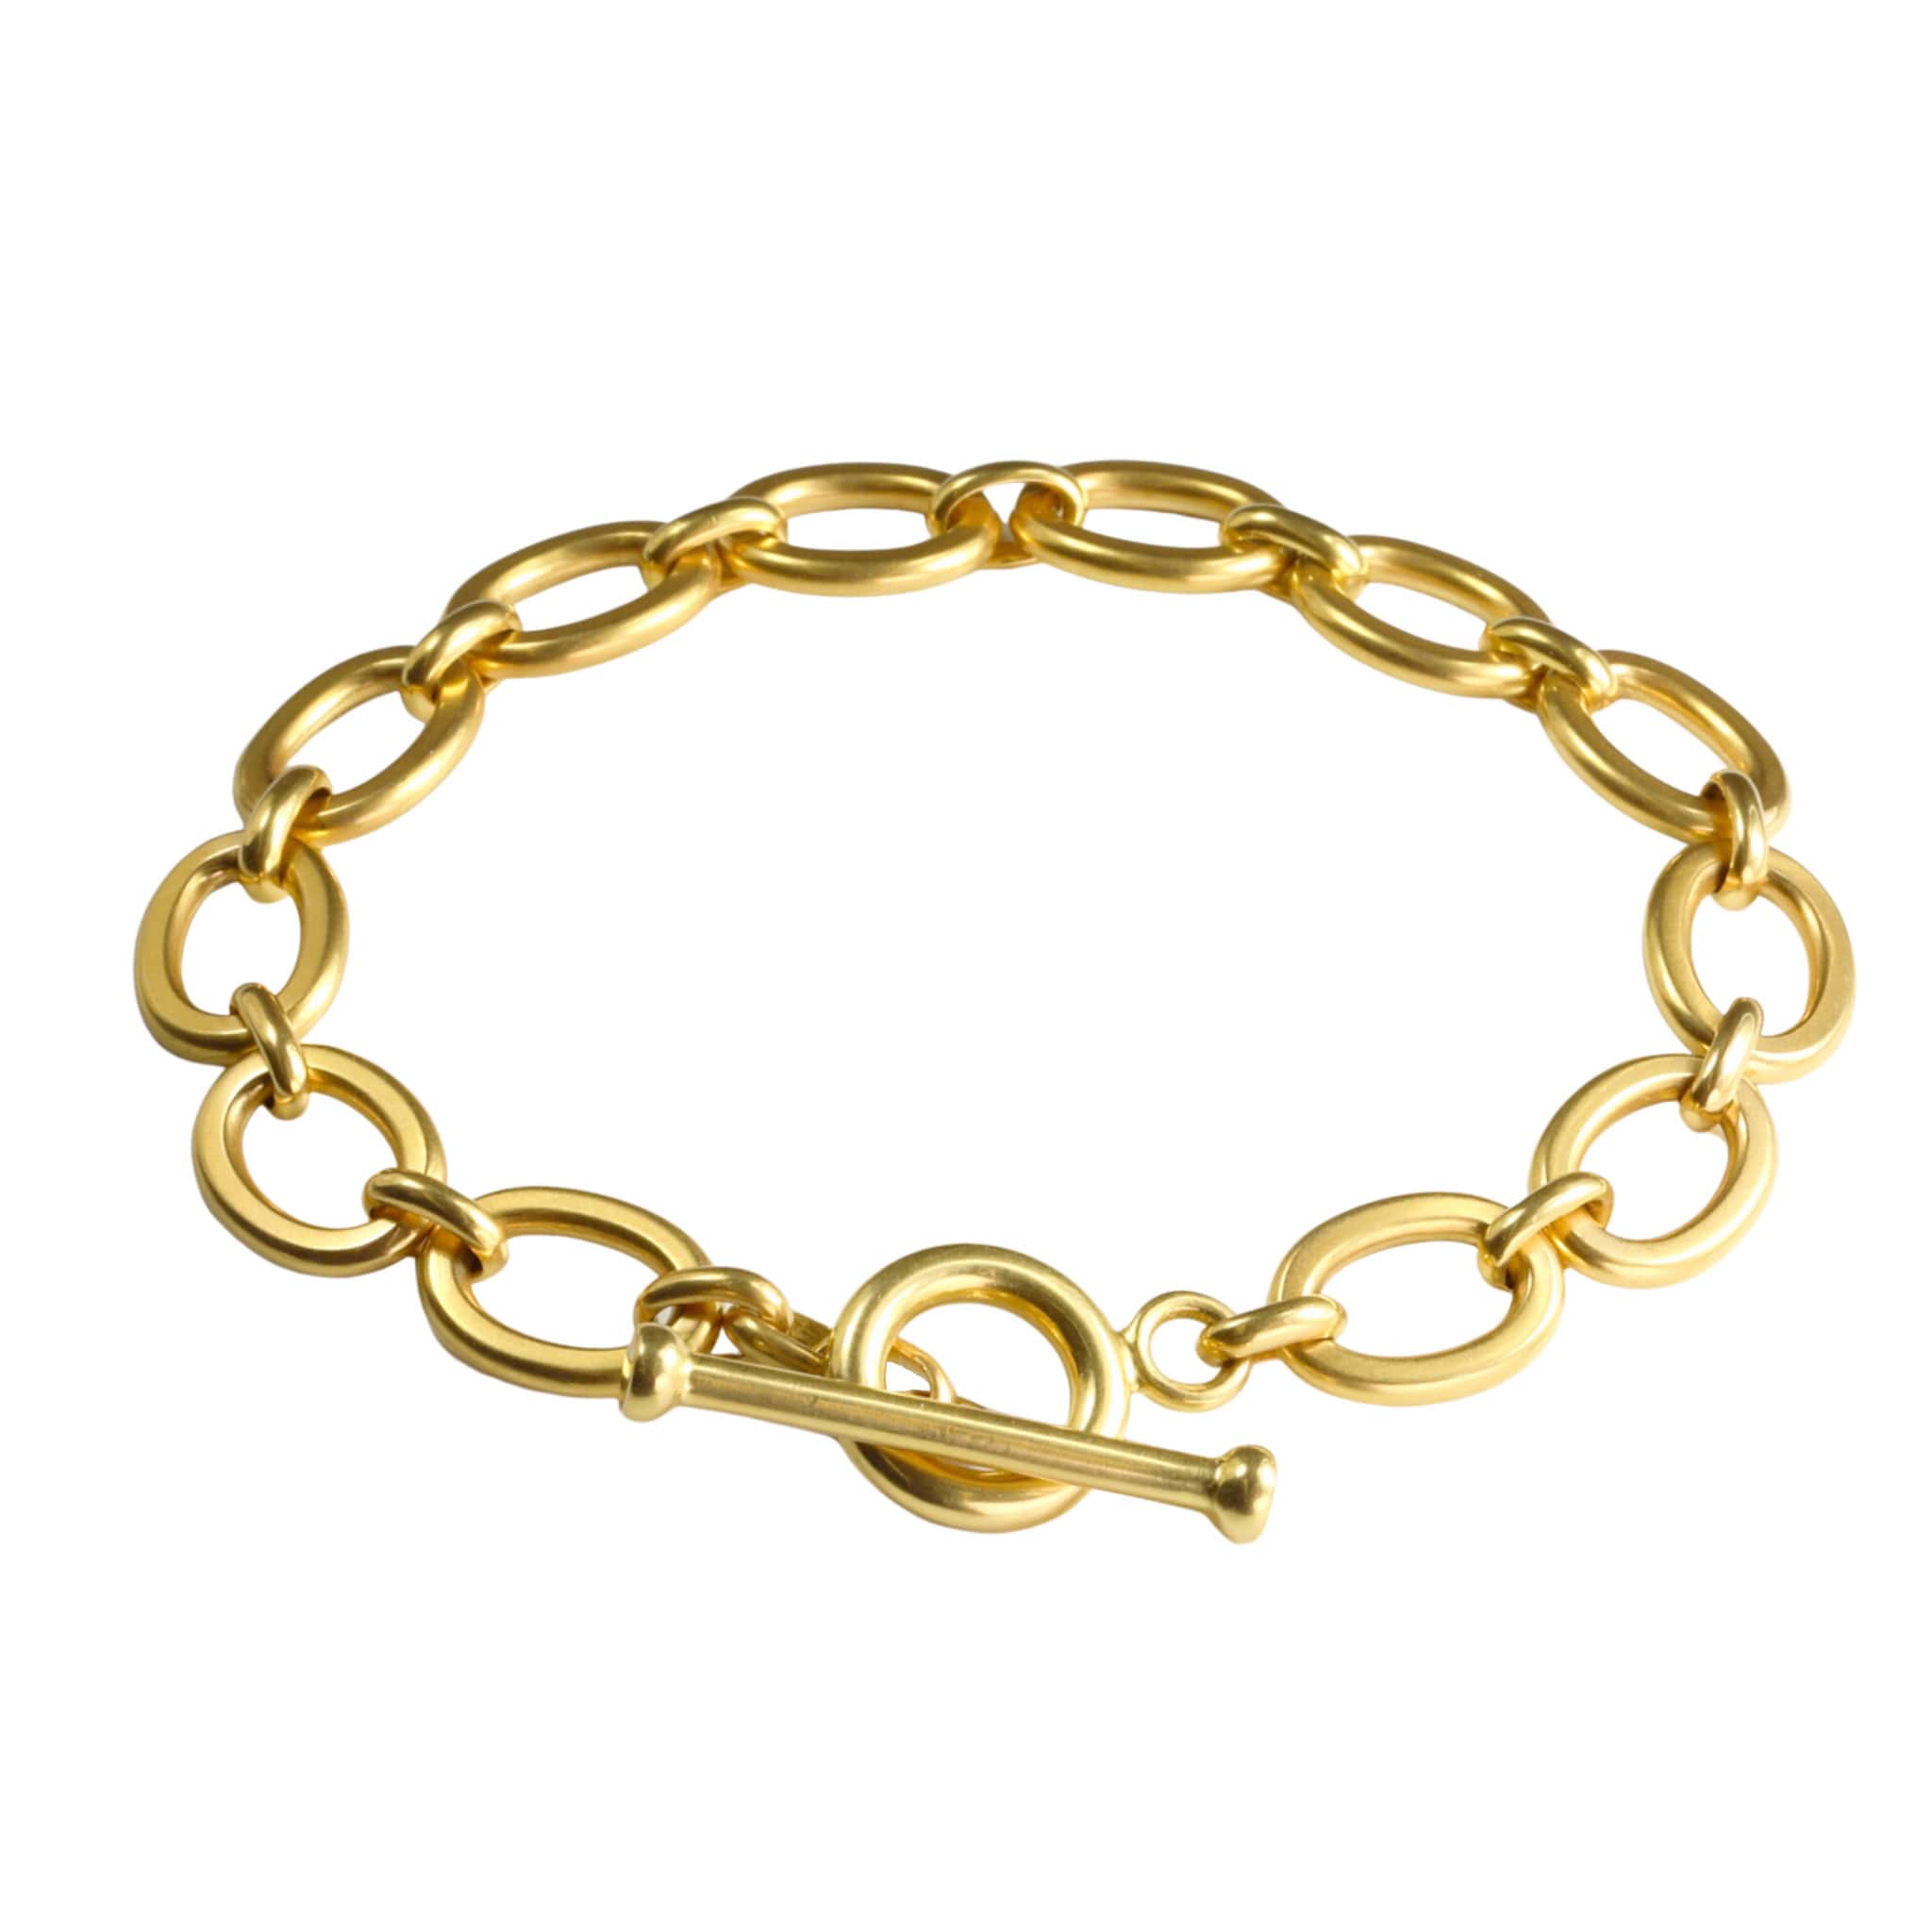 14k Gold Personalized Bracelet Stretch or Clasp - Goldie Girl